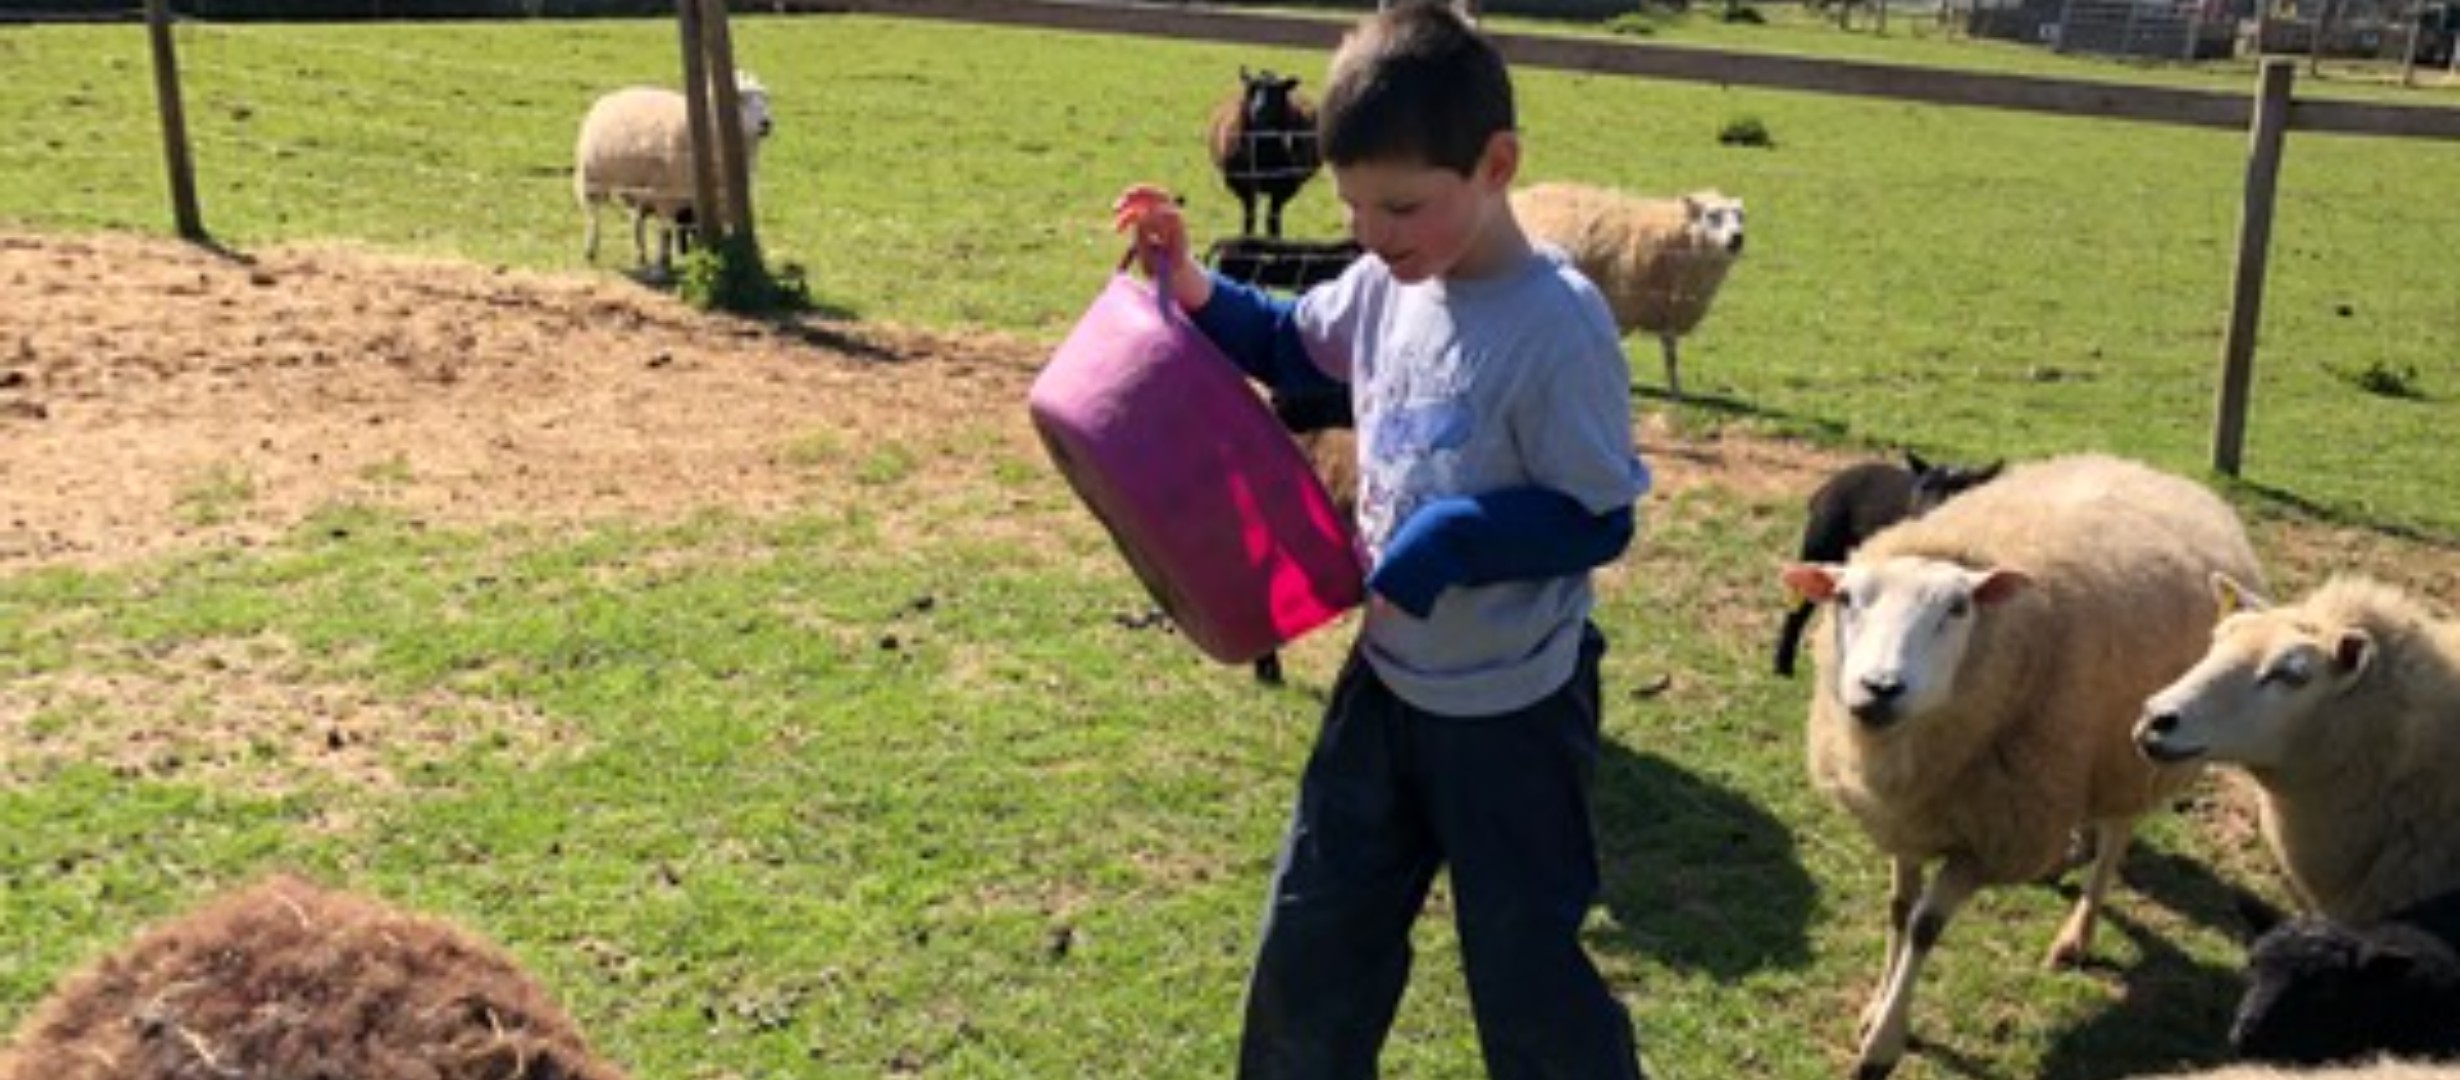 Young person holding a pink bucket walking in a field with a number of sheep following.